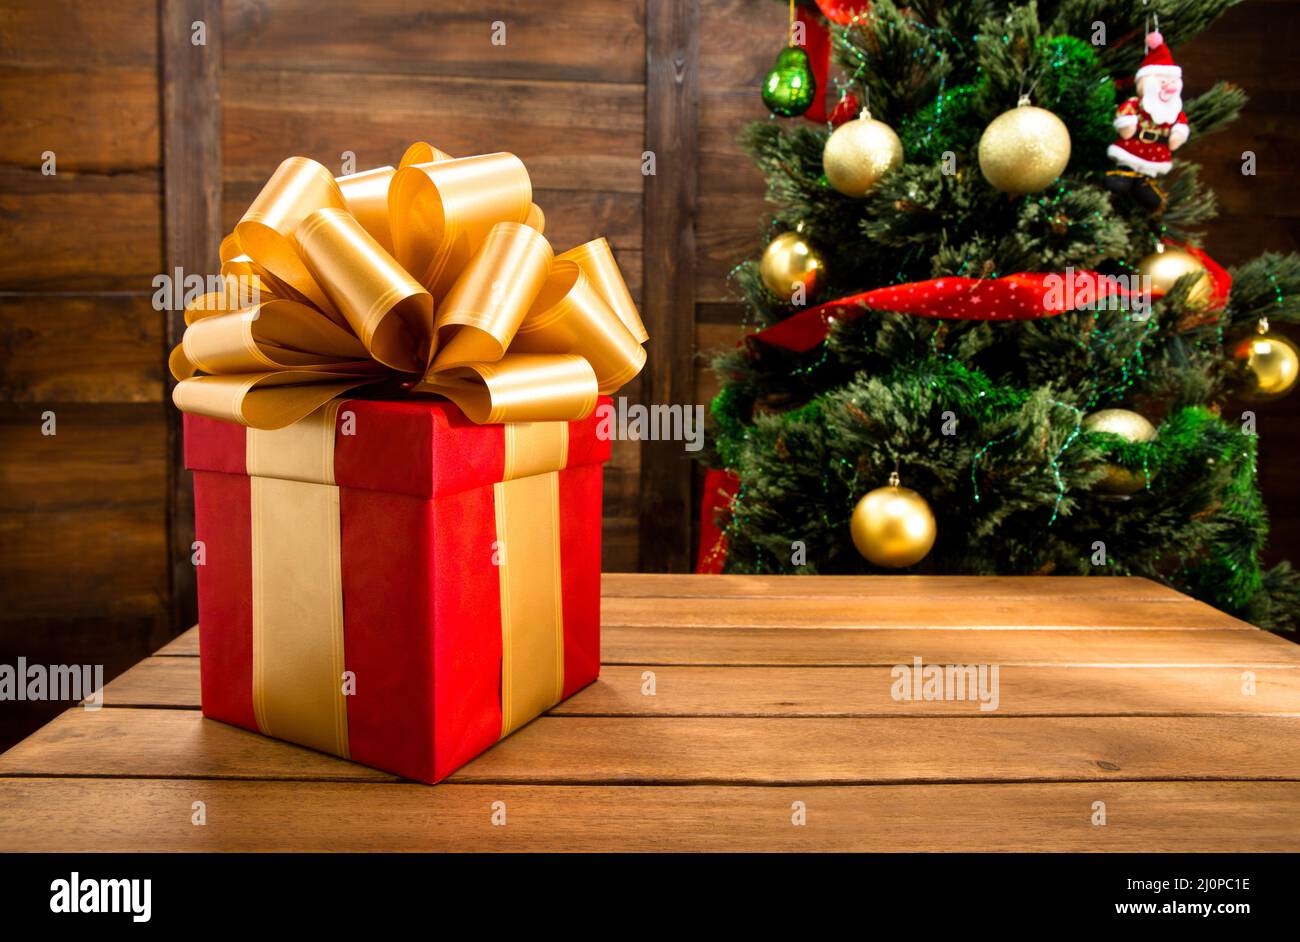 Christmas and New Year Red Box Gift Decorated by Golden Ribbon and Big Golden Loopy Bow. Christmas Tree with Balls, Ribbons, San Stock Photo